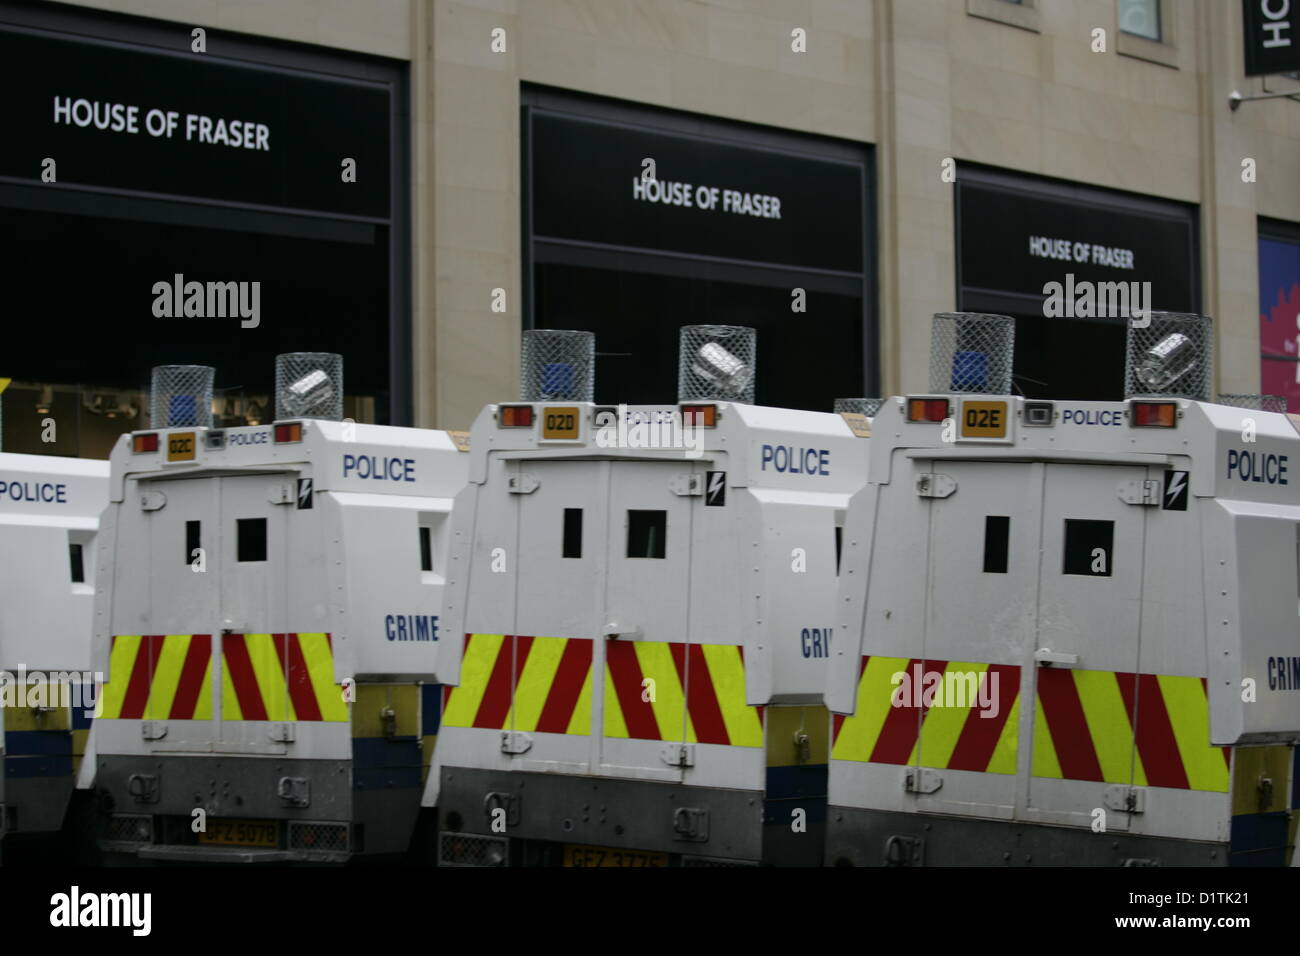 Belfast, UK. 5th Jan, 2013. A Line of PSNI Landrovers outside House of Fraser department store in Belfast. The Flag protests continue to take place after the City Council voted on the 3rd of December 2012 to restrict the flying the Union Jack flag from City hall to 17 days per year, where previously it flew every day of the year. Stock Photo